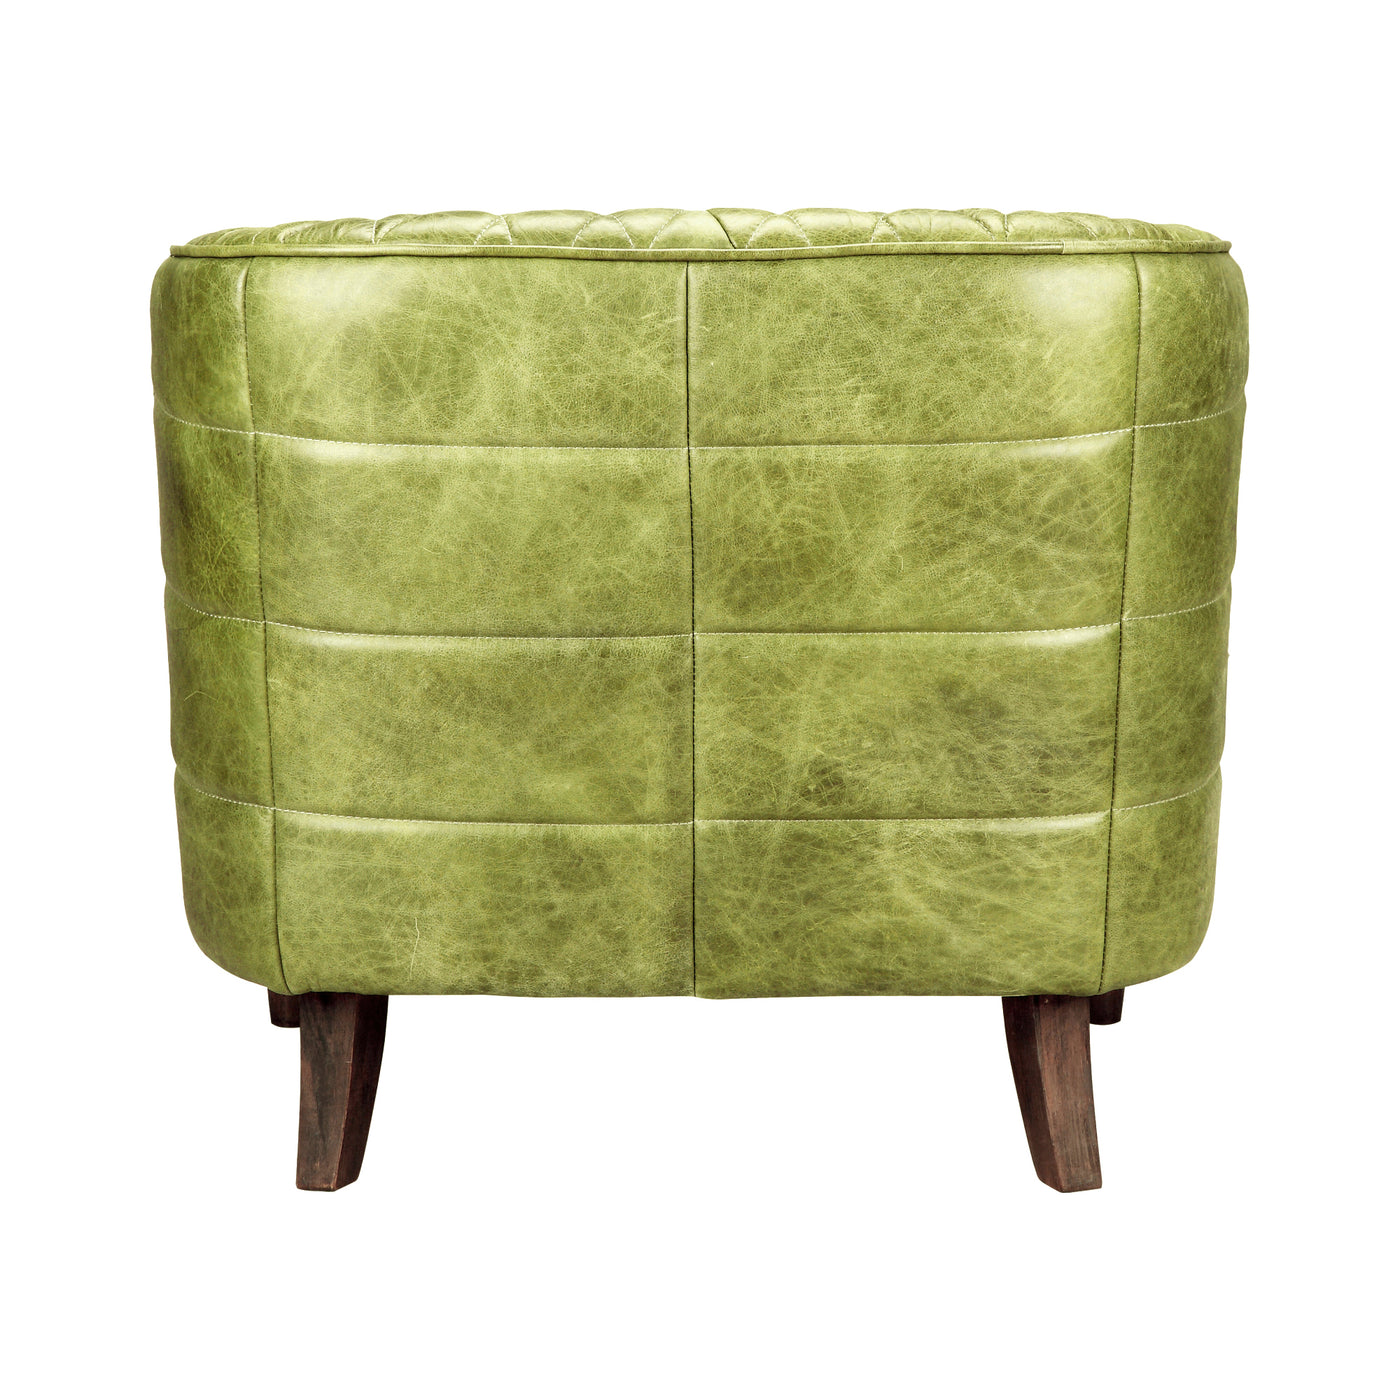 Rustic top-grain leather with a finely-tailored, diamond-tufted seat and back give the Magdelan a high-end, designer appea...